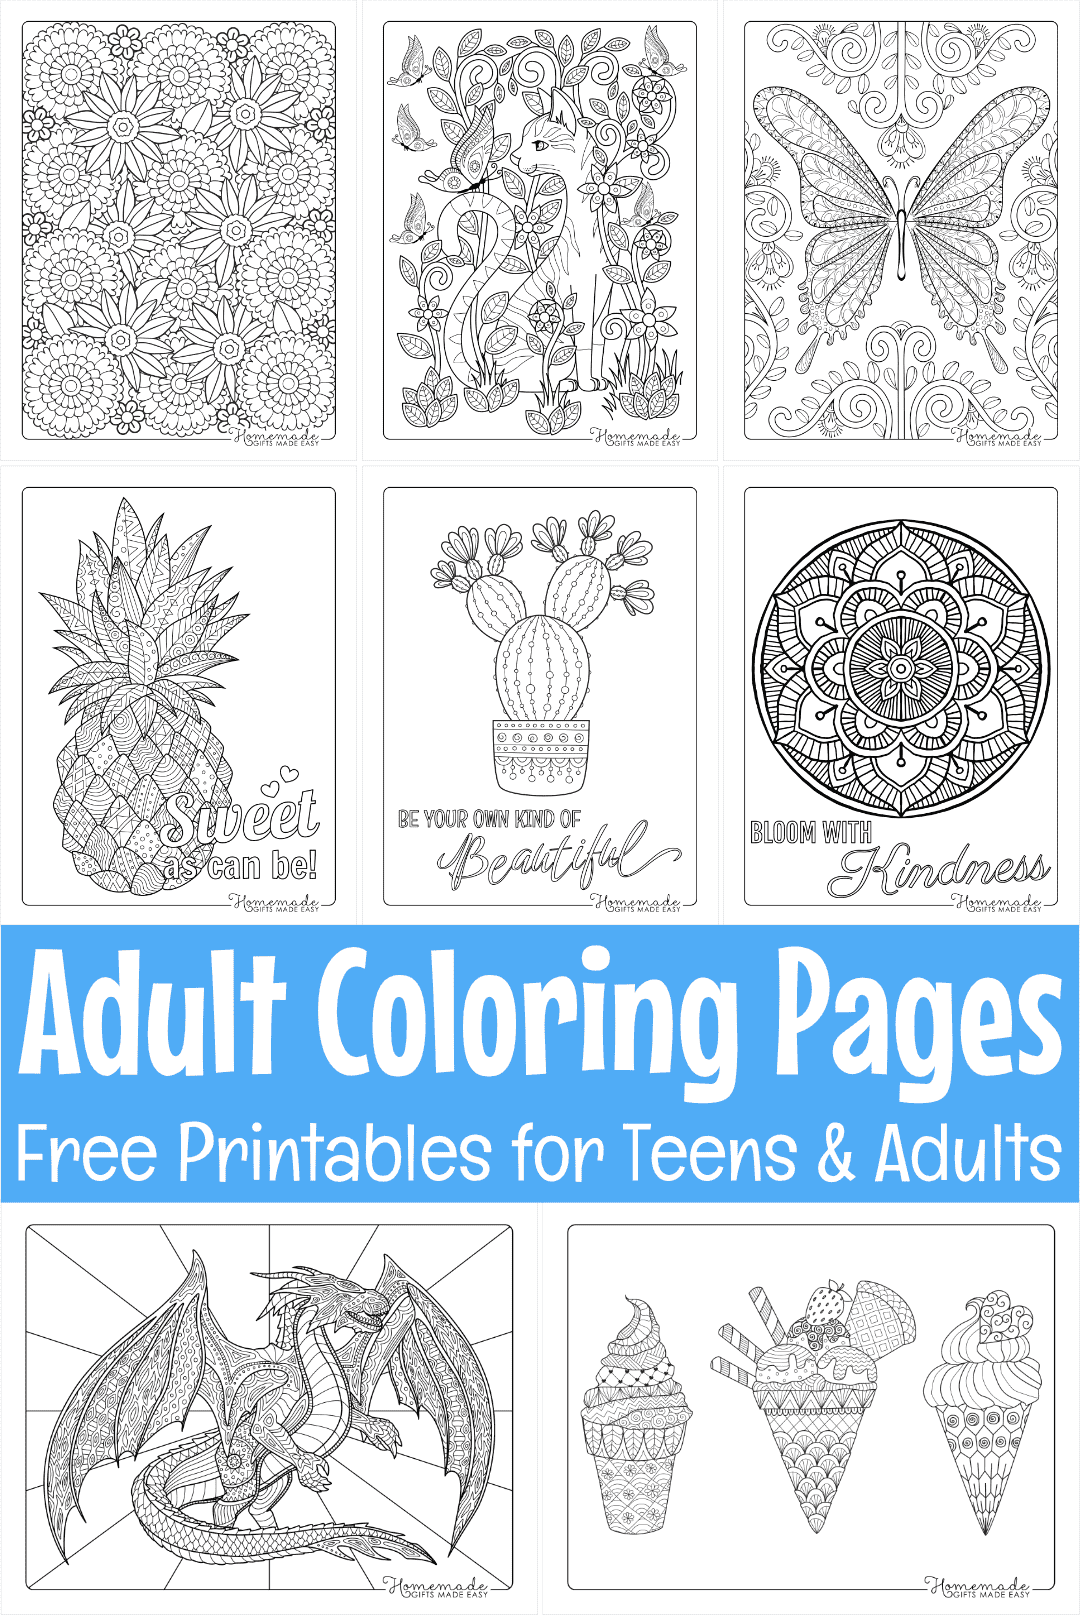 25 Adult Coloring Pages to Print for Free